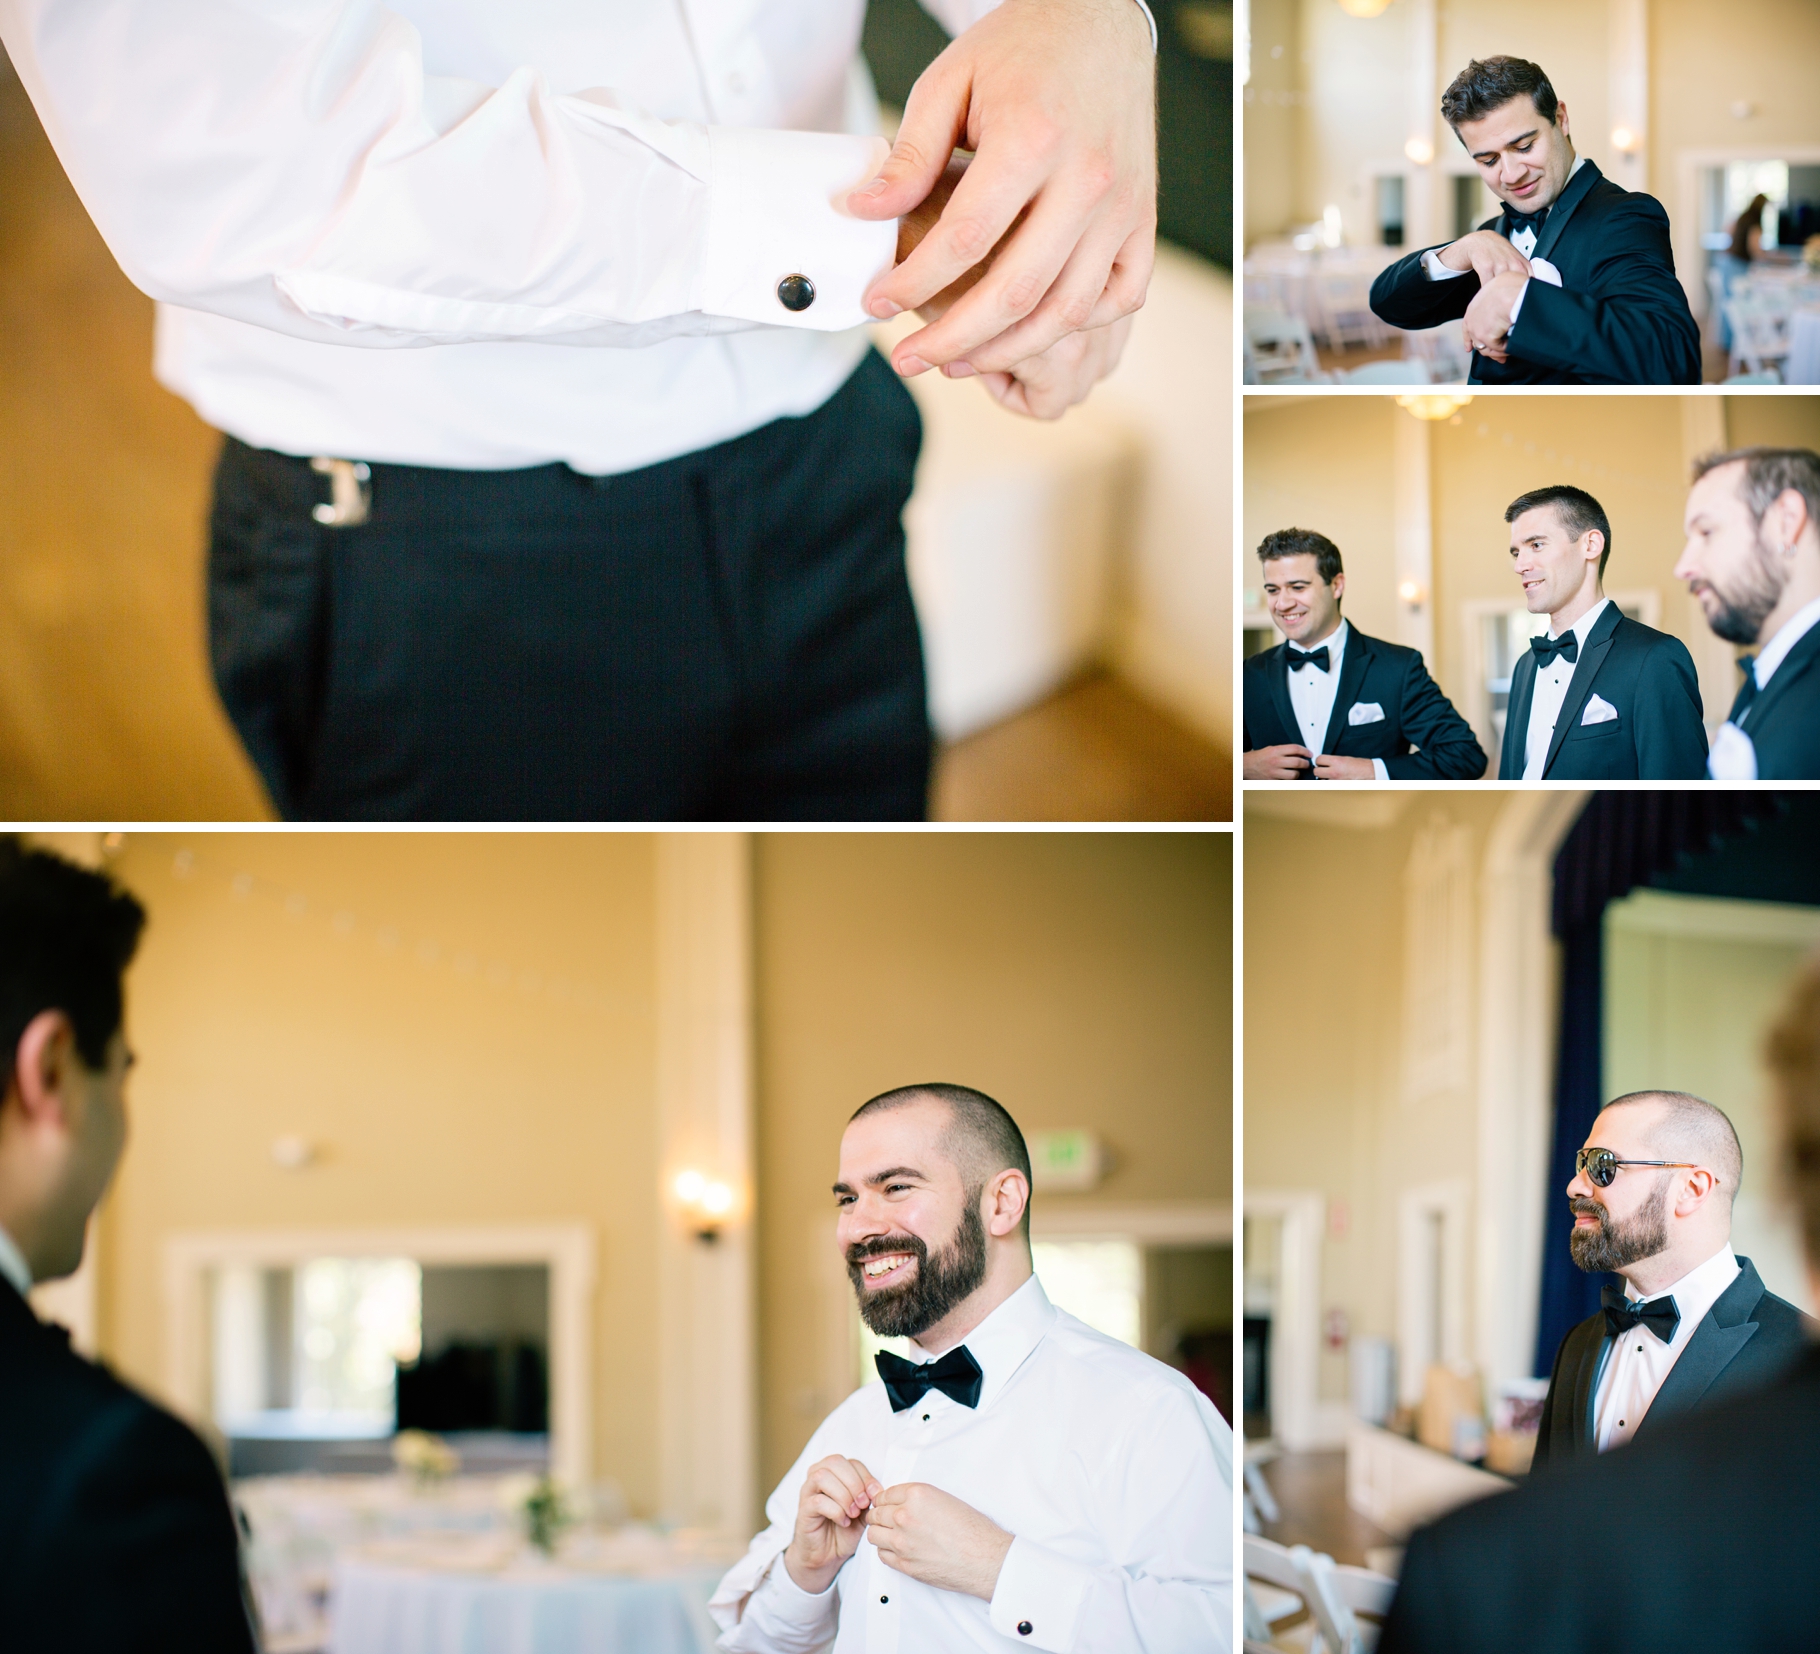 9-Groom-Getting-Ready-Groomsmen-Great-Hall-Green-Lake-Seattle-Wedding-Photographer-Photography-by-Betty-Elaine